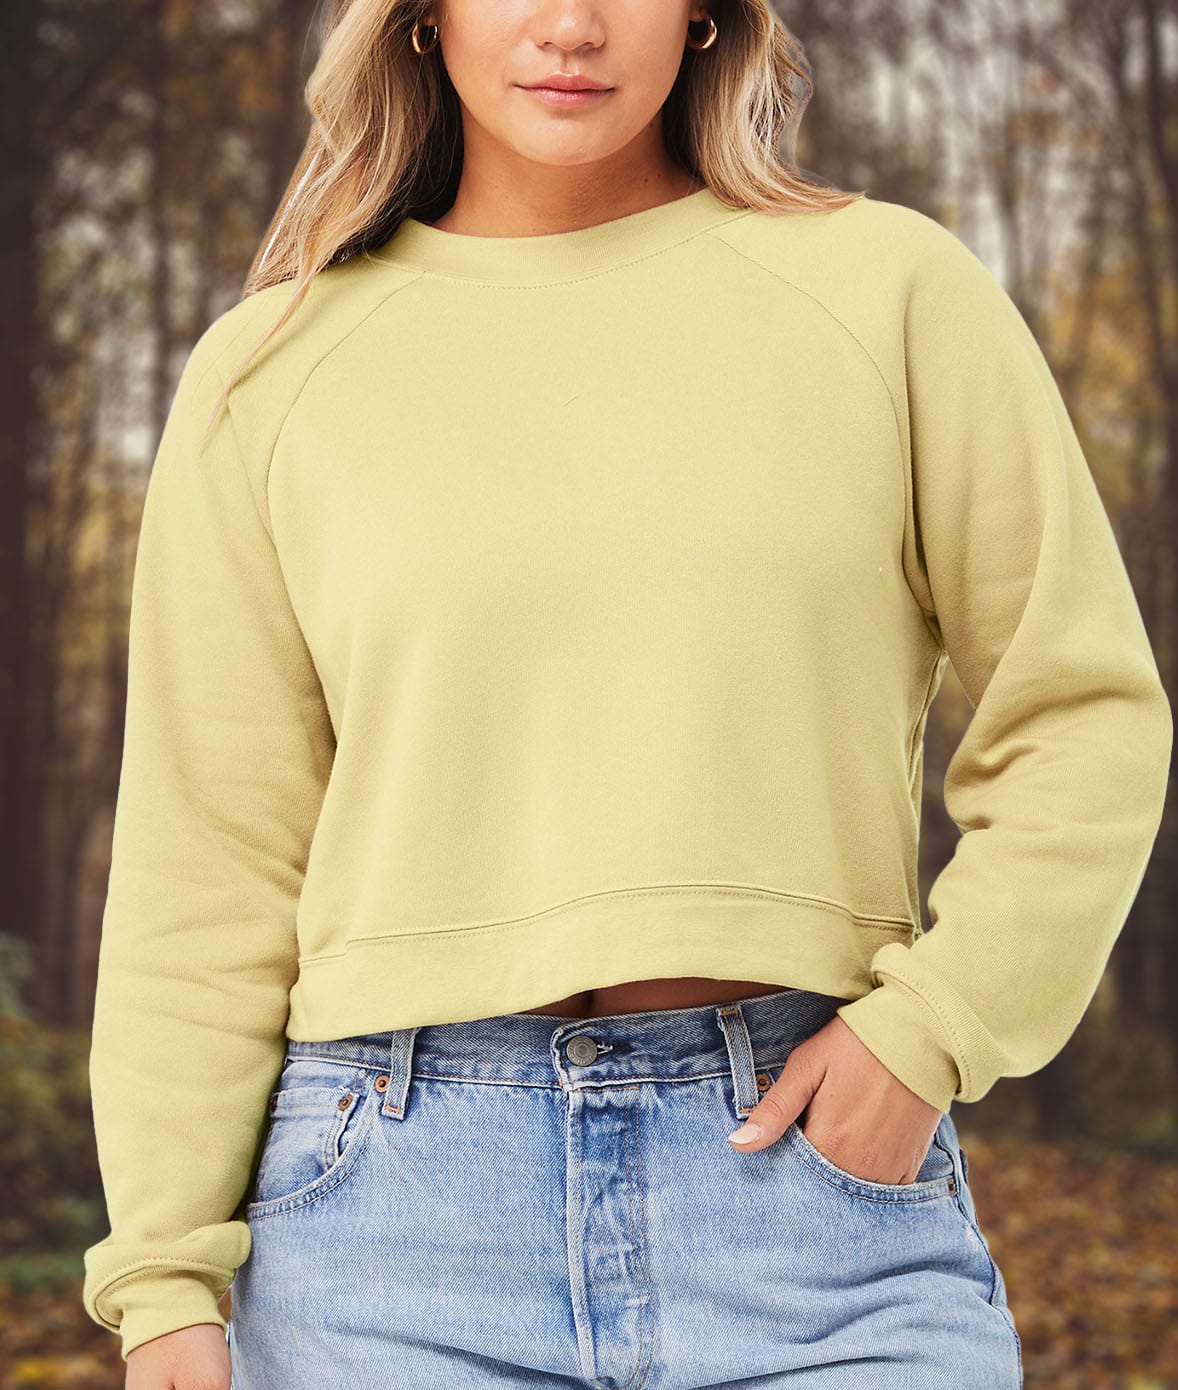 Women's Ridiculously Soft Raglan Abbreviated Crop Pullover Worn by Model